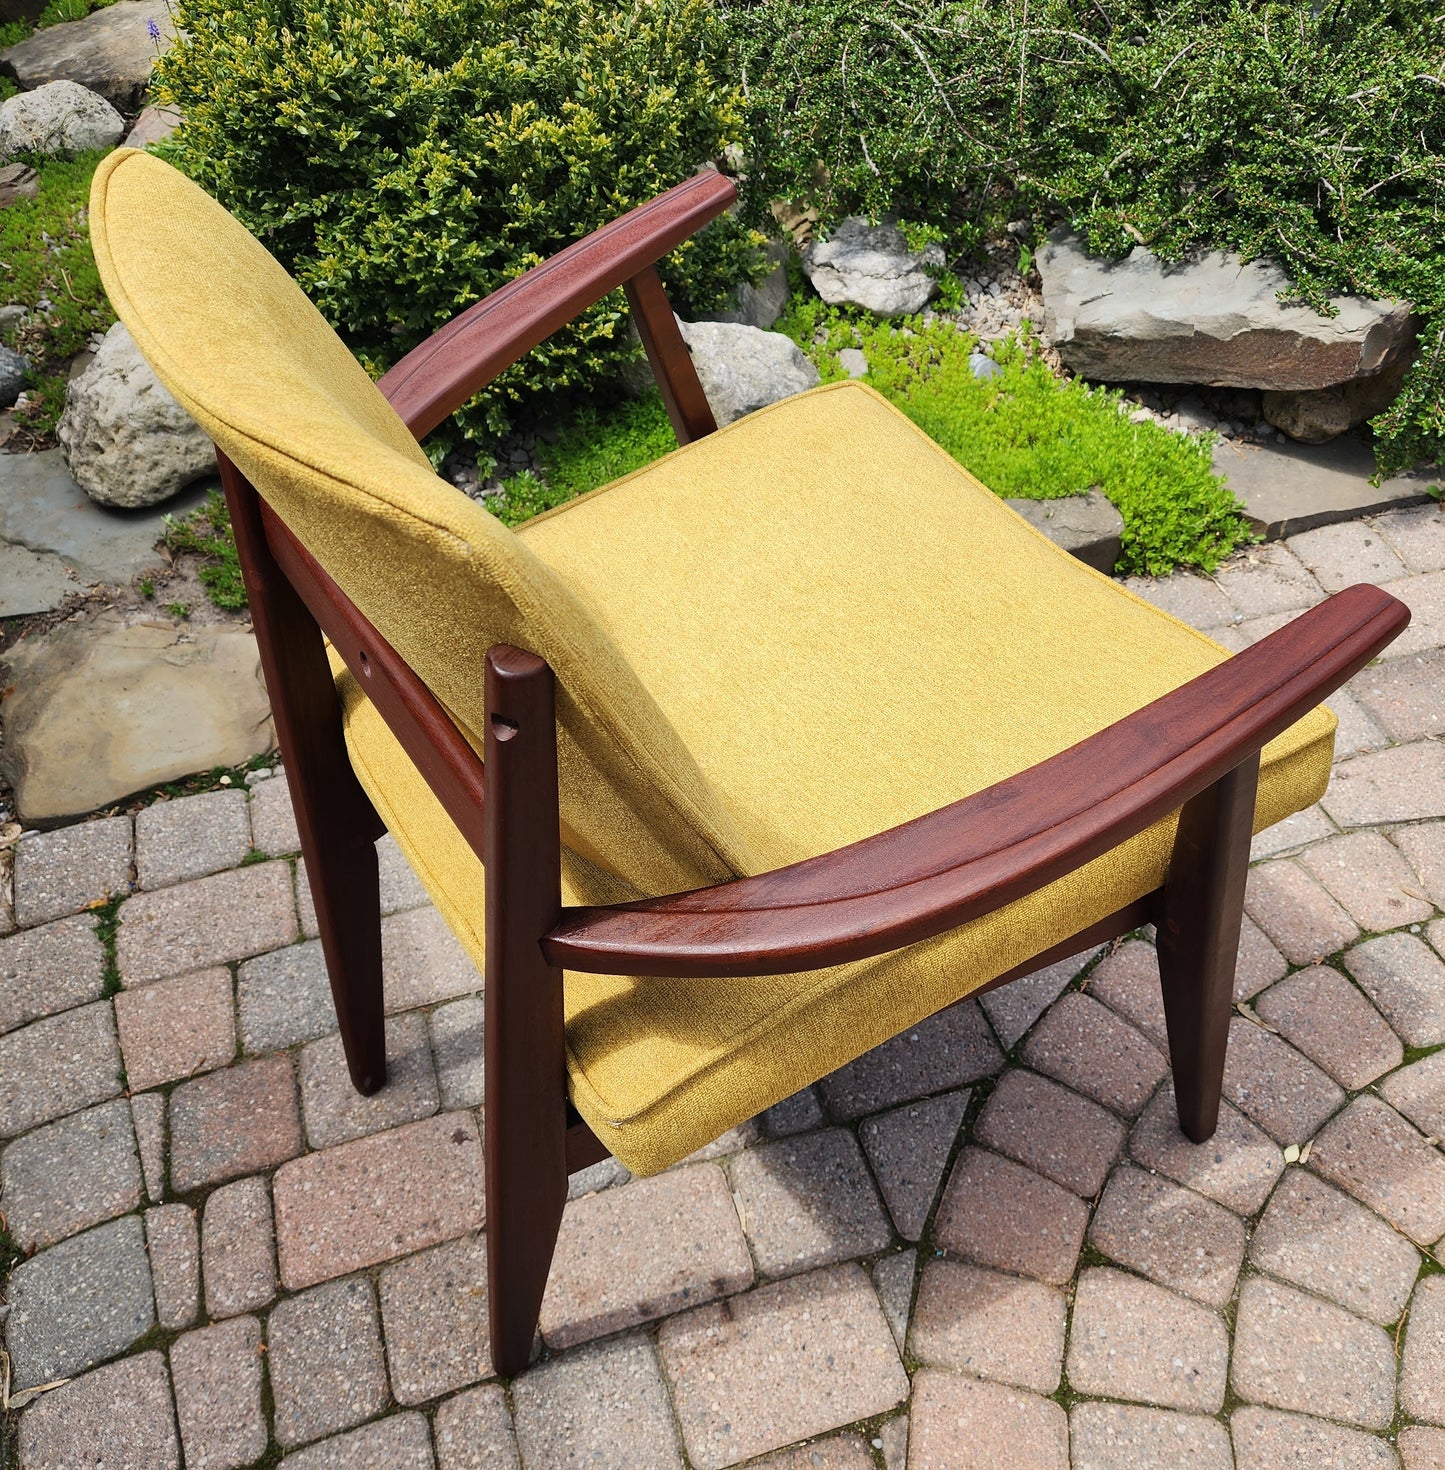 REFINISHED REUPHOLSTERED Mid Century Modern Afromosia Arm Chair by Jan Kuypers